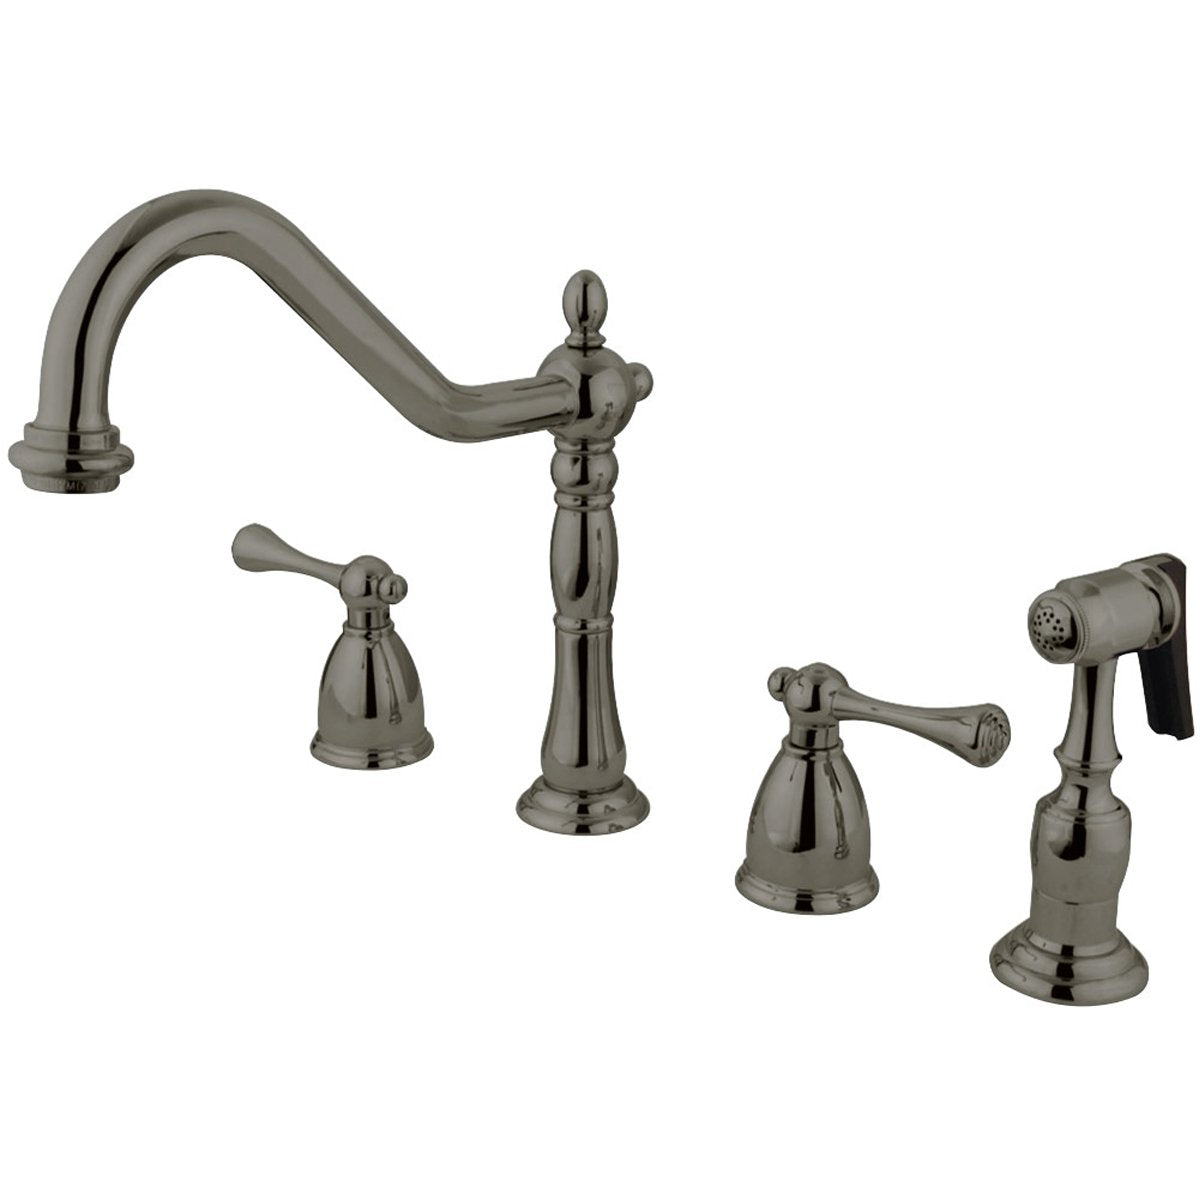 Kingston Brass English Country Widespread Kitchen Faucet